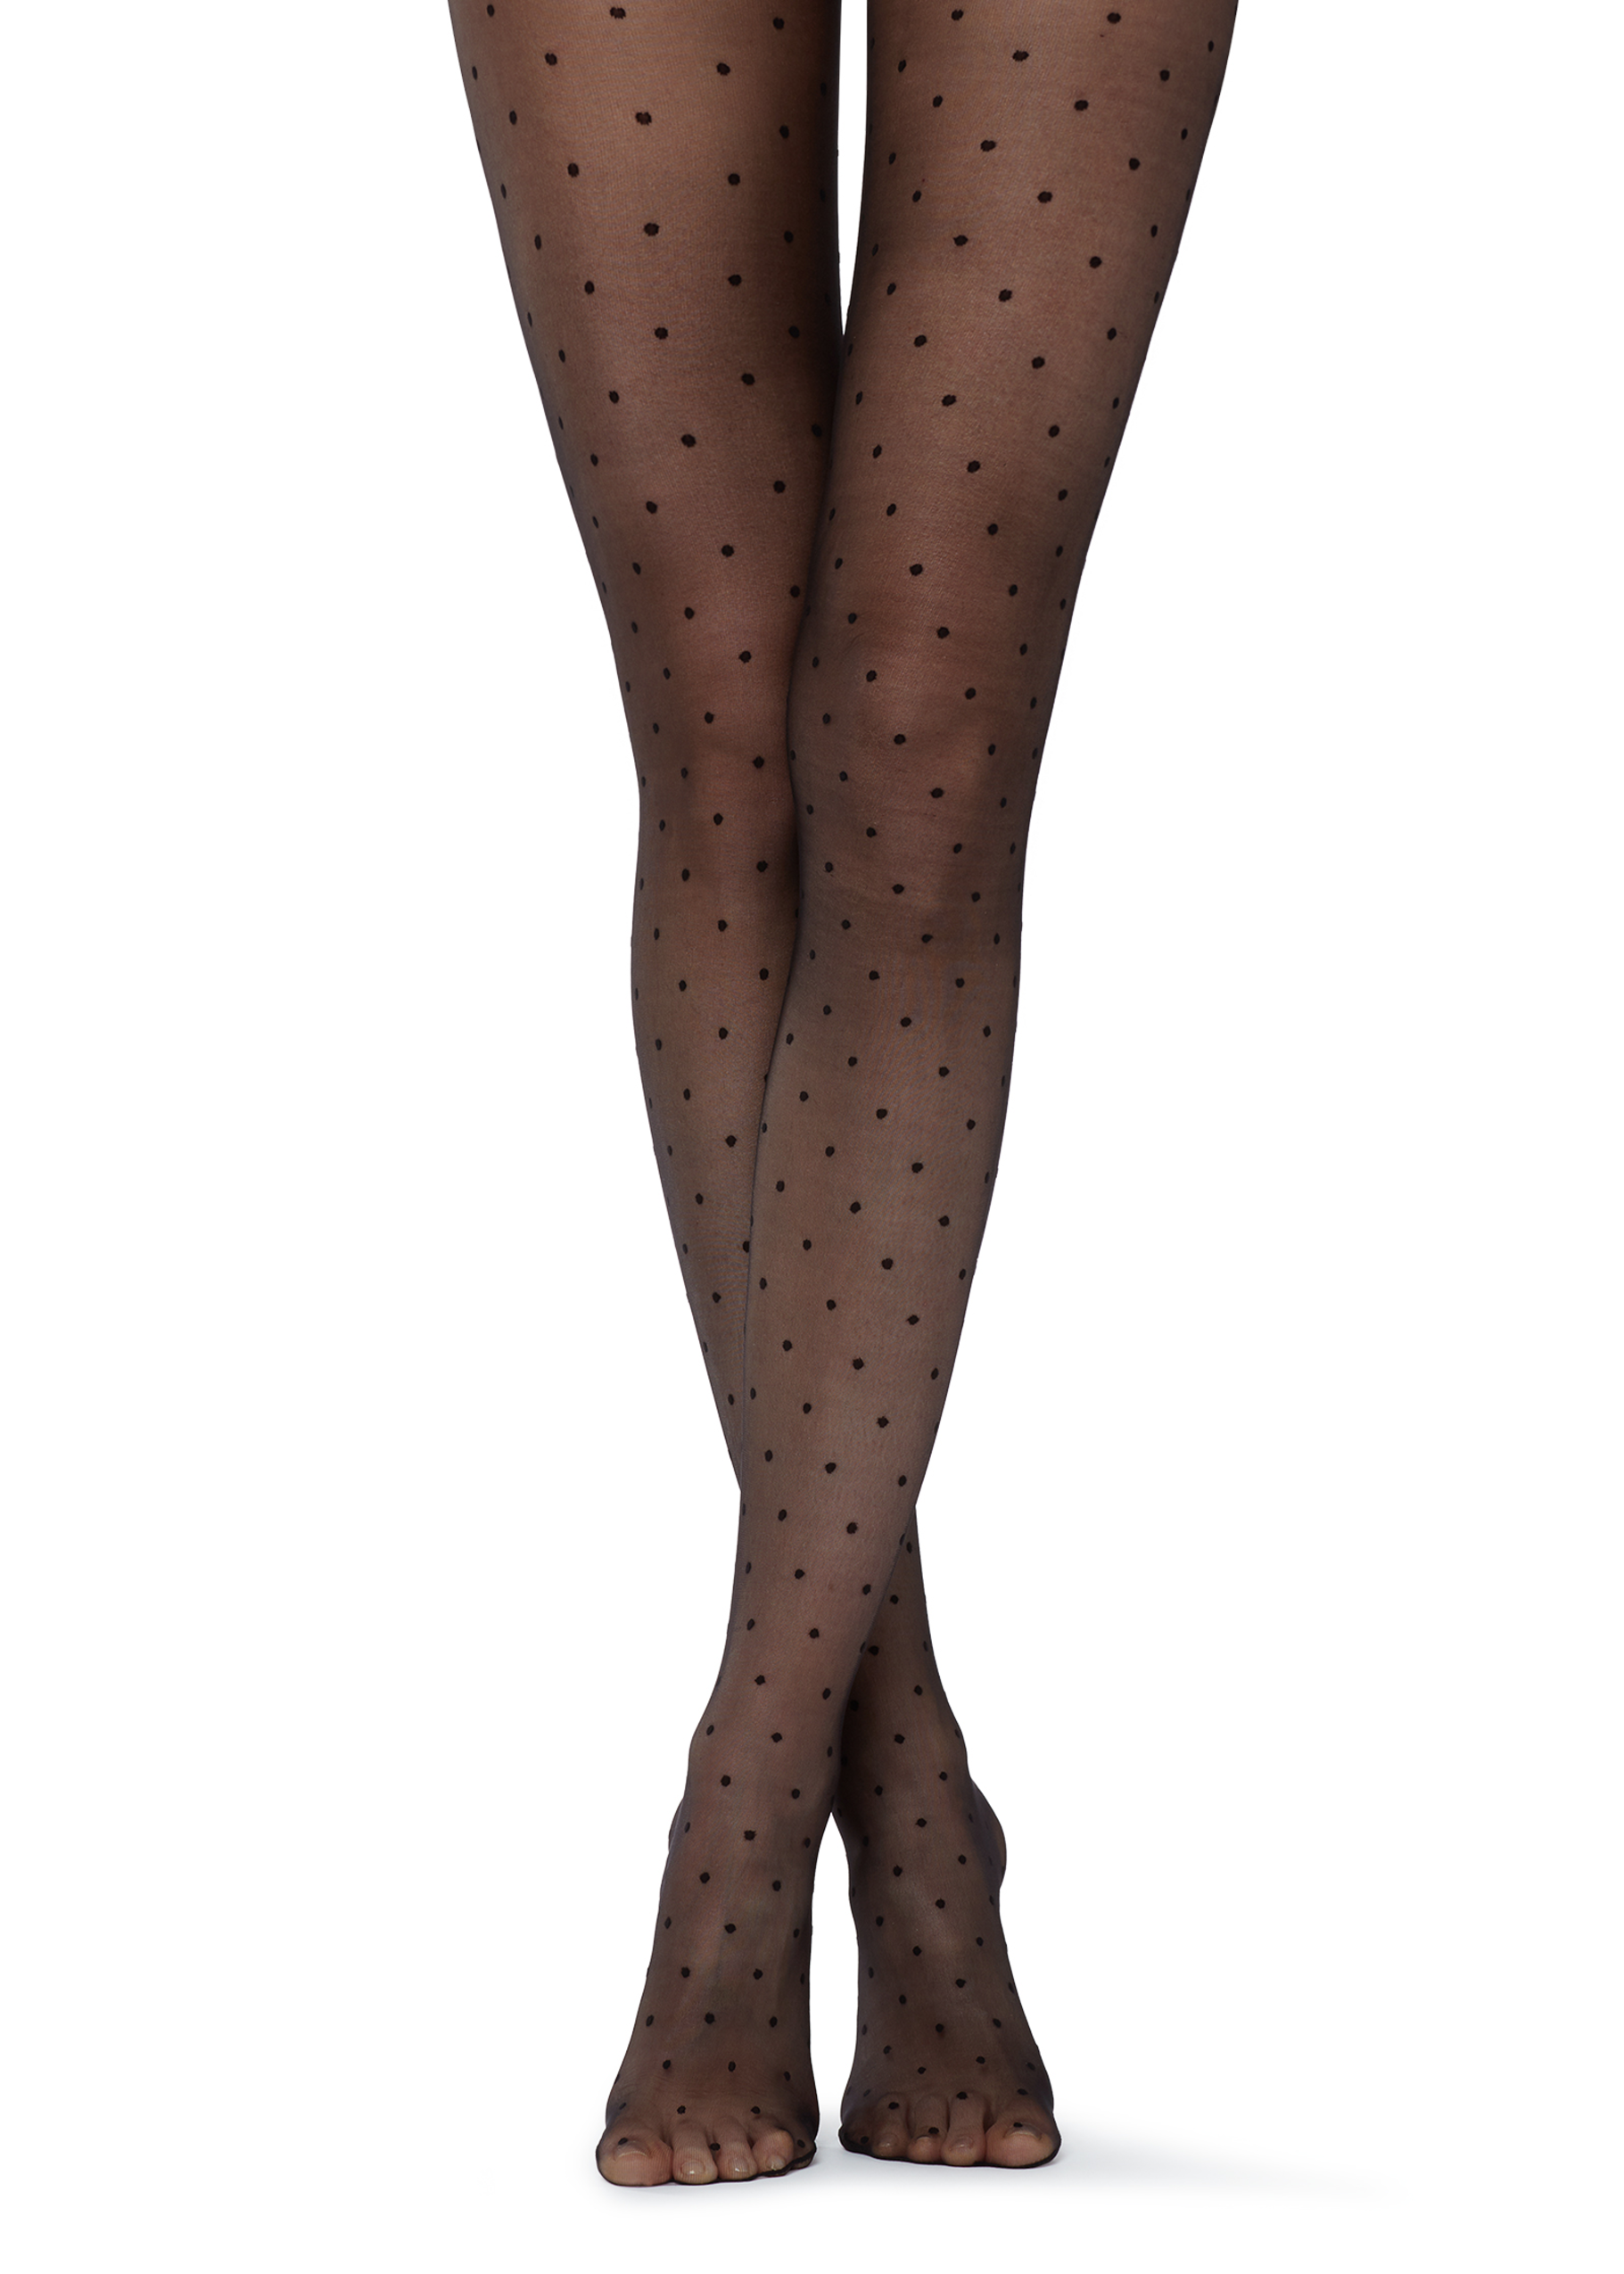 Polka Dot Tights: Timeless Accessories